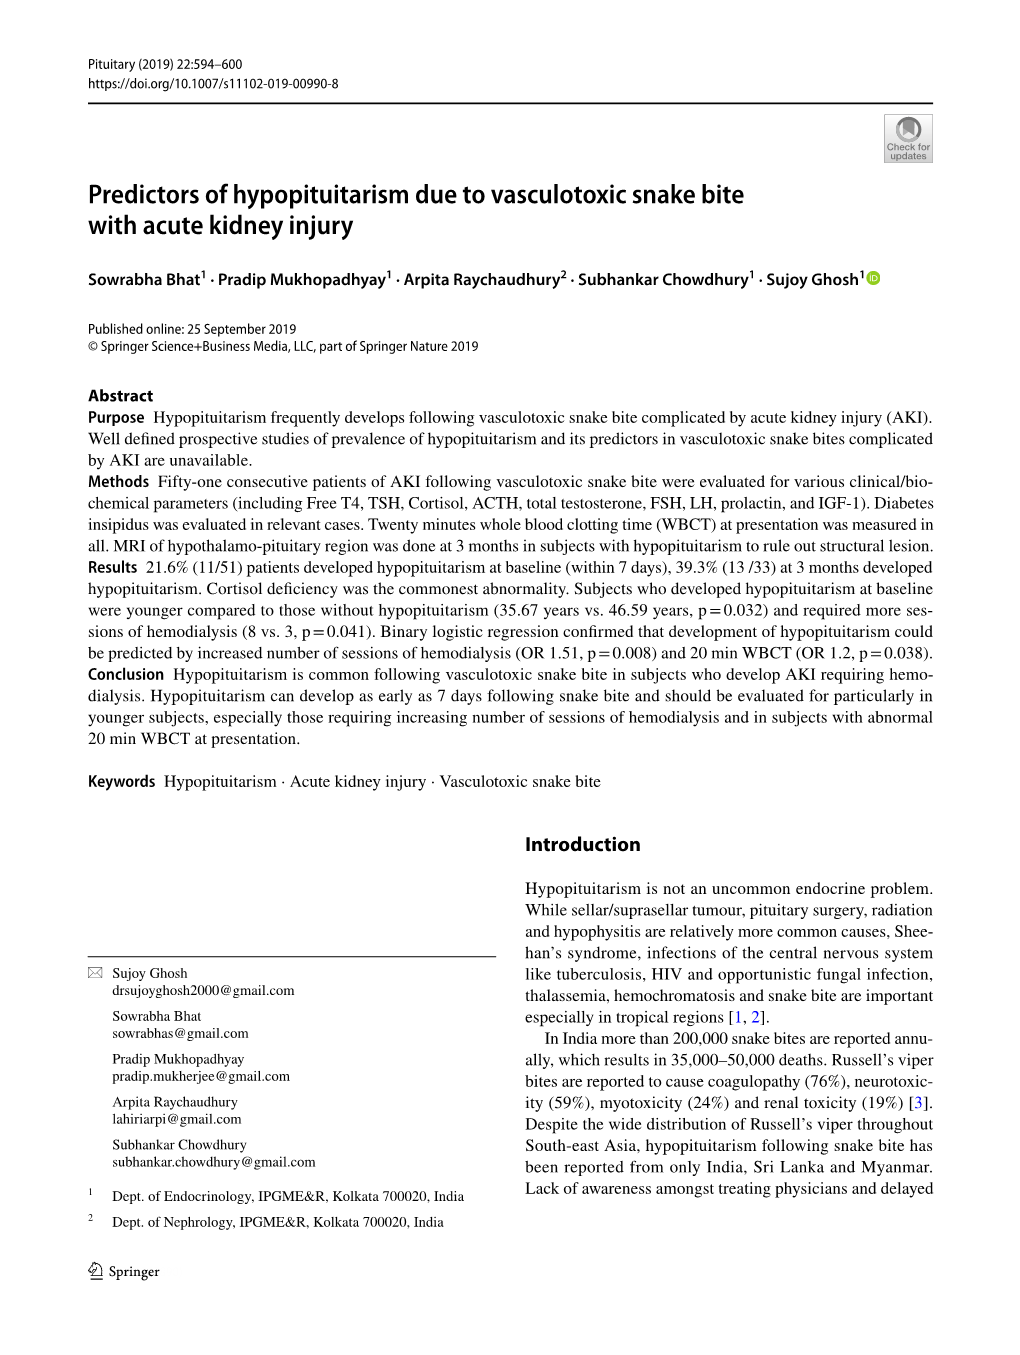 Predictors of Hypopituitarism Due to Vasculotoxic Snake Bite with Acute Kidney Injury